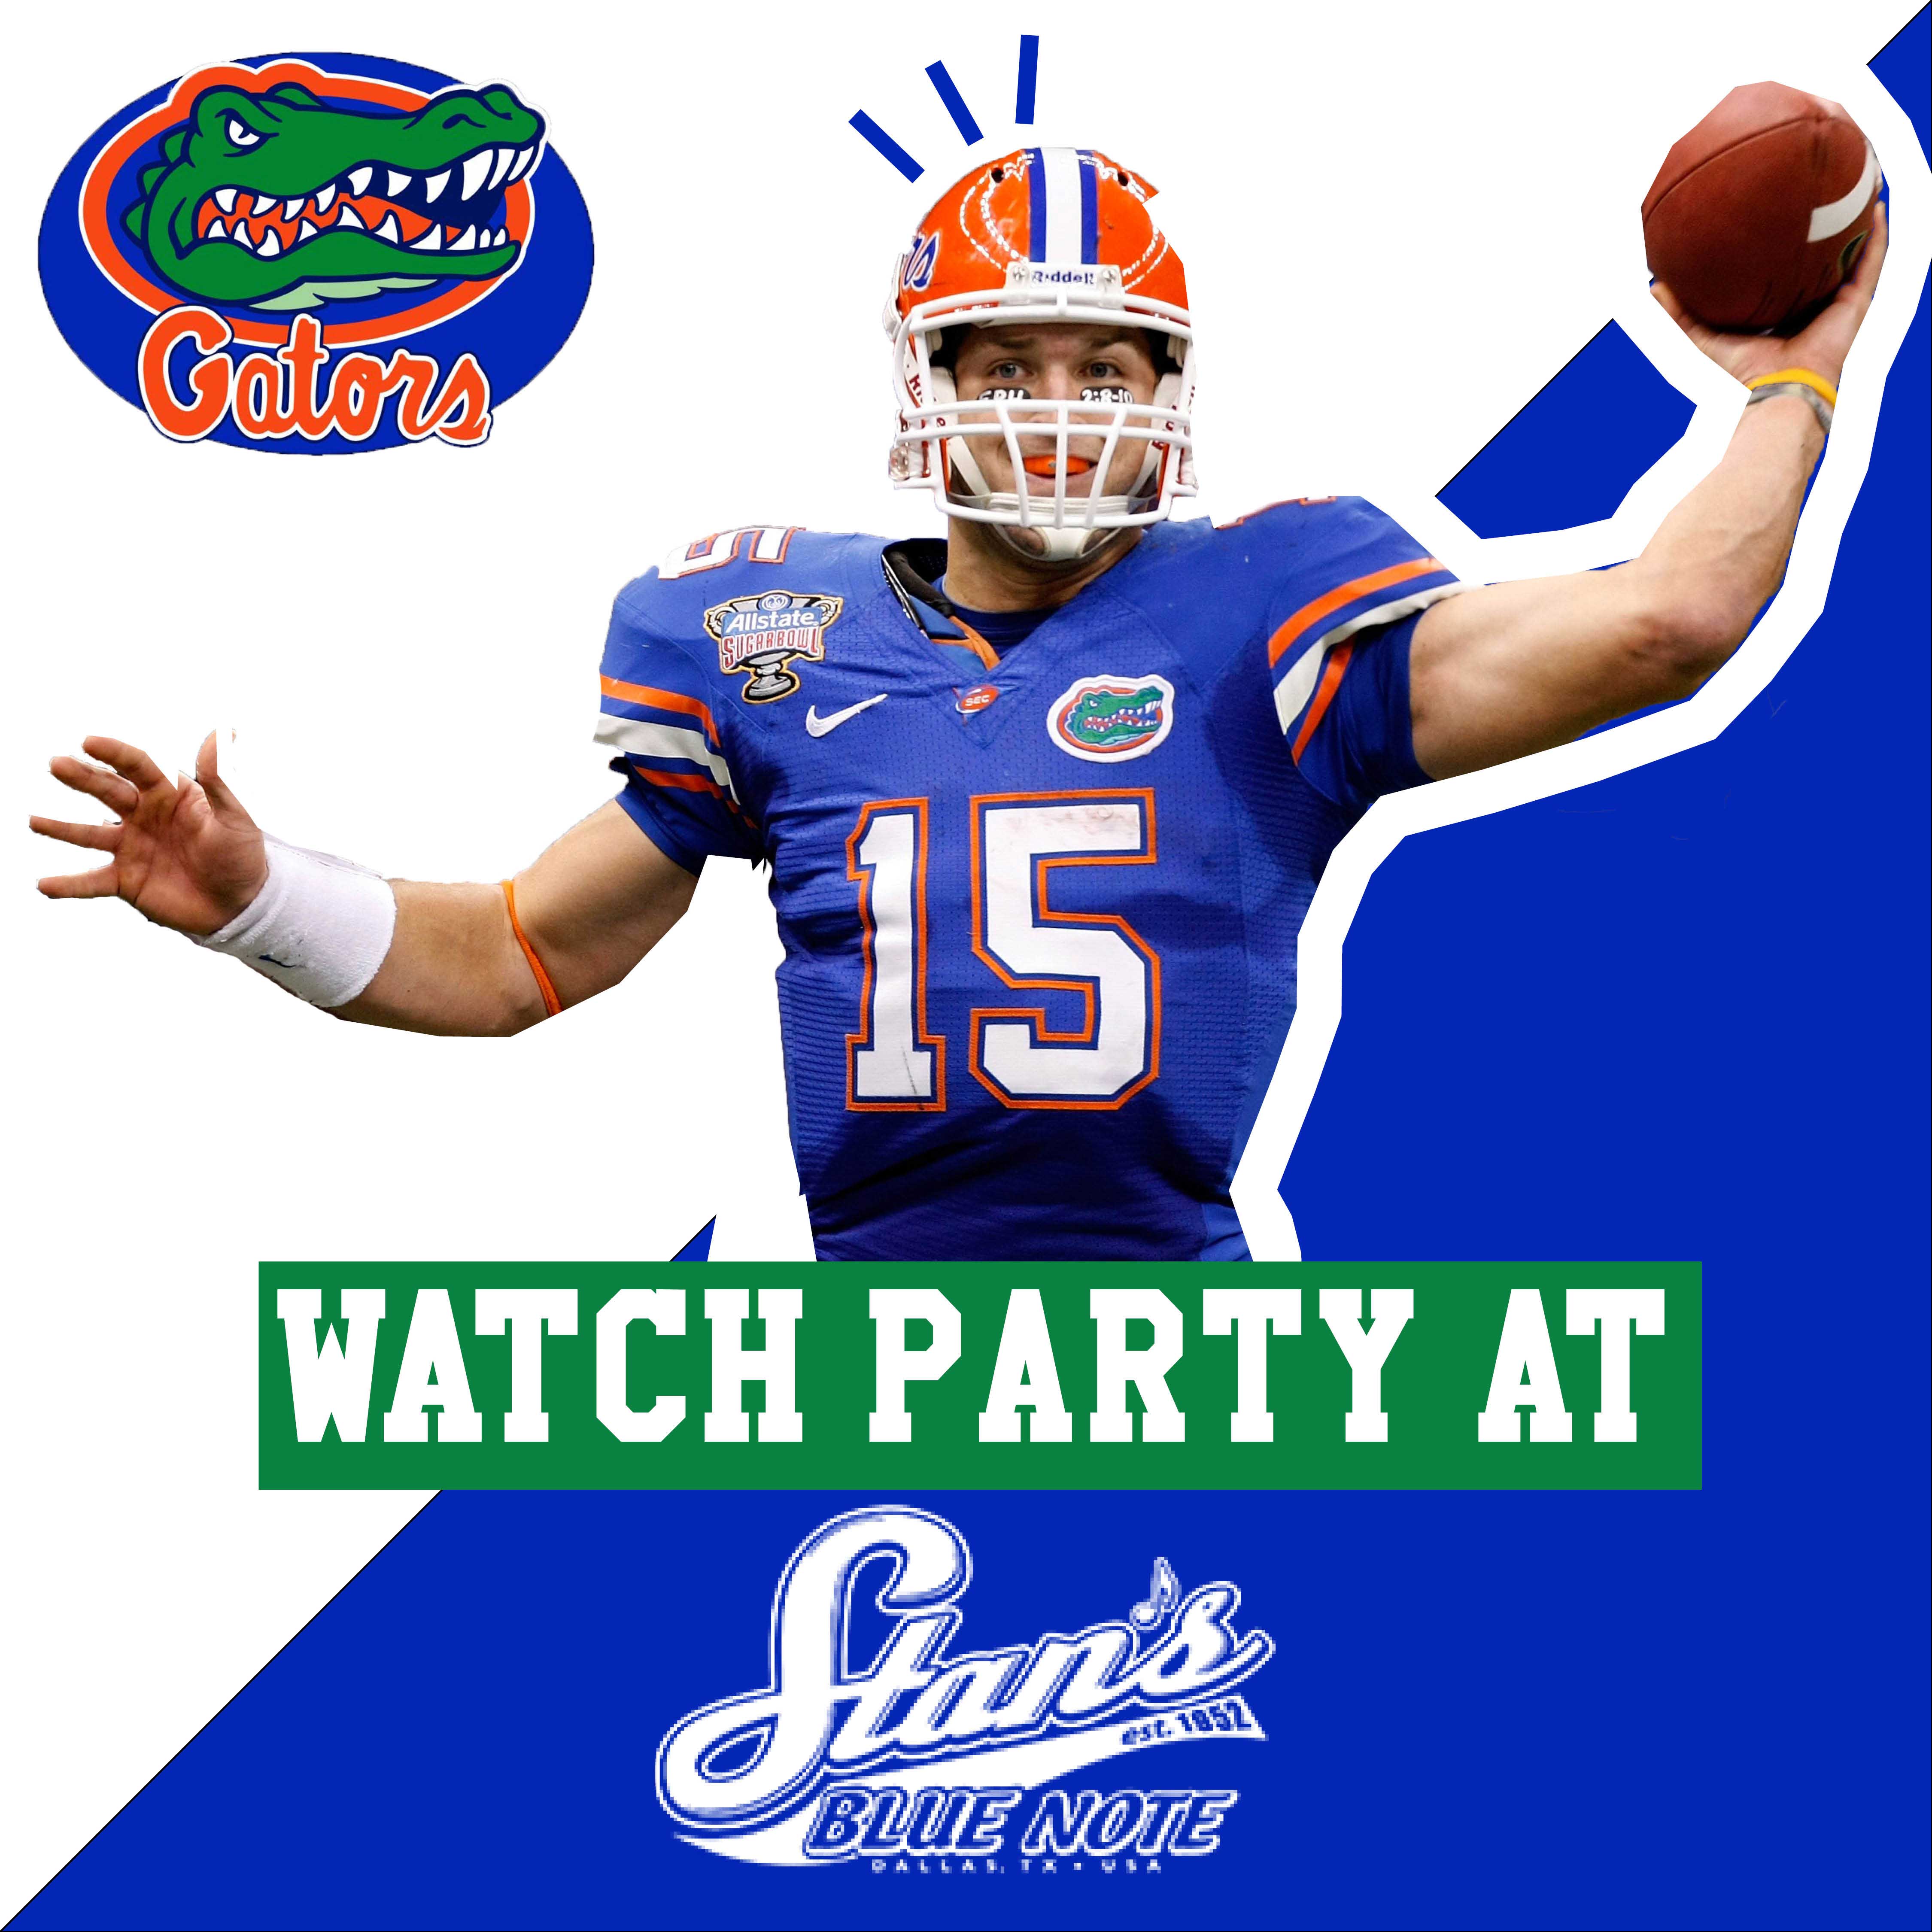 University of Florida Gators Official Watch Party – Stan's Blue Note